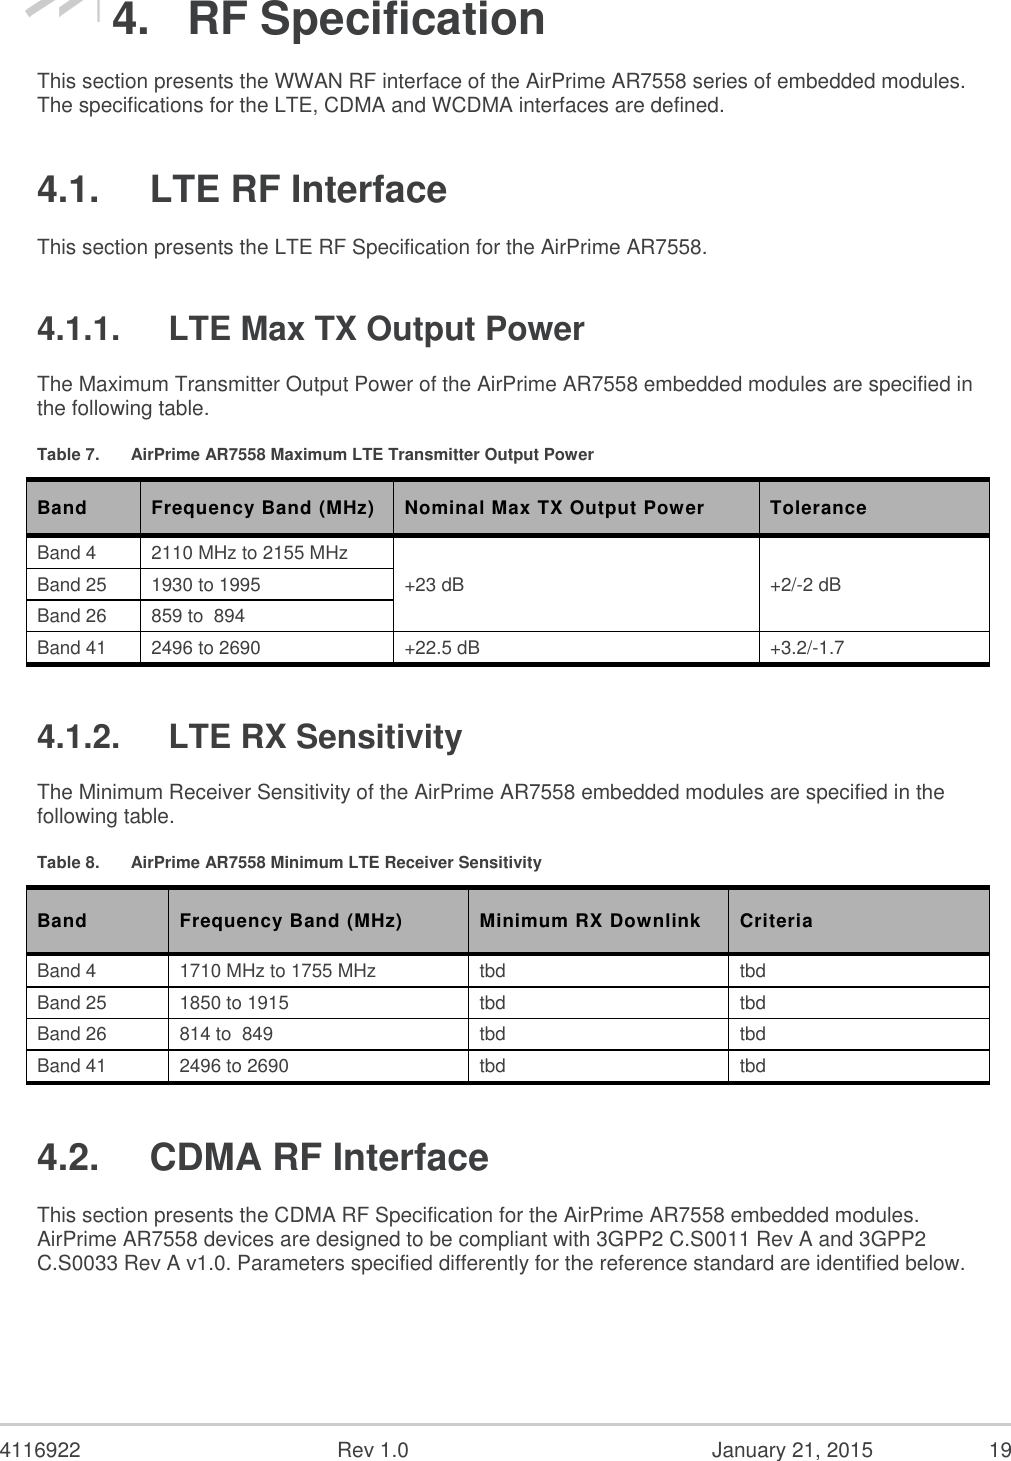  4116922  Rev 1.0  January 21, 2015  19 4. RF Specification This section presents the WWAN RF interface of the AirPrime AR7558 series of embedded modules. The specifications for the LTE, CDMA and WCDMA interfaces are defined. 4.1.  LTE RF Interface This section presents the LTE RF Specification for the AirPrime AR7558. 4.1.1.  LTE Max TX Output Power The Maximum Transmitter Output Power of the AirPrime AR7558 embedded modules are specified in the following table. Table 7.  AirPrime AR7558 Maximum LTE Transmitter Output Power Band Frequency Band (MHz) Nominal Max TX Output Power Tolerance Band 4 2110 MHz to 2155 MHz +23 dB +2/-2 dB Band 25 1930 to 1995 Band 26 859 to  894 Band 41 2496 to 2690 +22.5 dB +3.2/-1.7 4.1.2.  LTE RX Sensitivity The Minimum Receiver Sensitivity of the AirPrime AR7558 embedded modules are specified in the following table. Table 8.  AirPrime AR7558 Minimum LTE Receiver Sensitivity Band  Frequency Band (MHz) Minimum RX Downlink Criteria Band 4 1710 MHz to 1755 MHz tbd tbd Band 25 1850 to 1915 tbd tbd Band 26 814 to  849 tbd tbd Band 41 2496 to 2690 tbd tbd 4.2.  CDMA RF Interface This section presents the CDMA RF Specification for the AirPrime AR7558 embedded modules. AirPrime AR7558 devices are designed to be compliant with 3GPP2 C.S0011 Rev A and 3GPP2 C.S0033 Rev A v1.0. Parameters specified differently for the reference standard are identified below. 